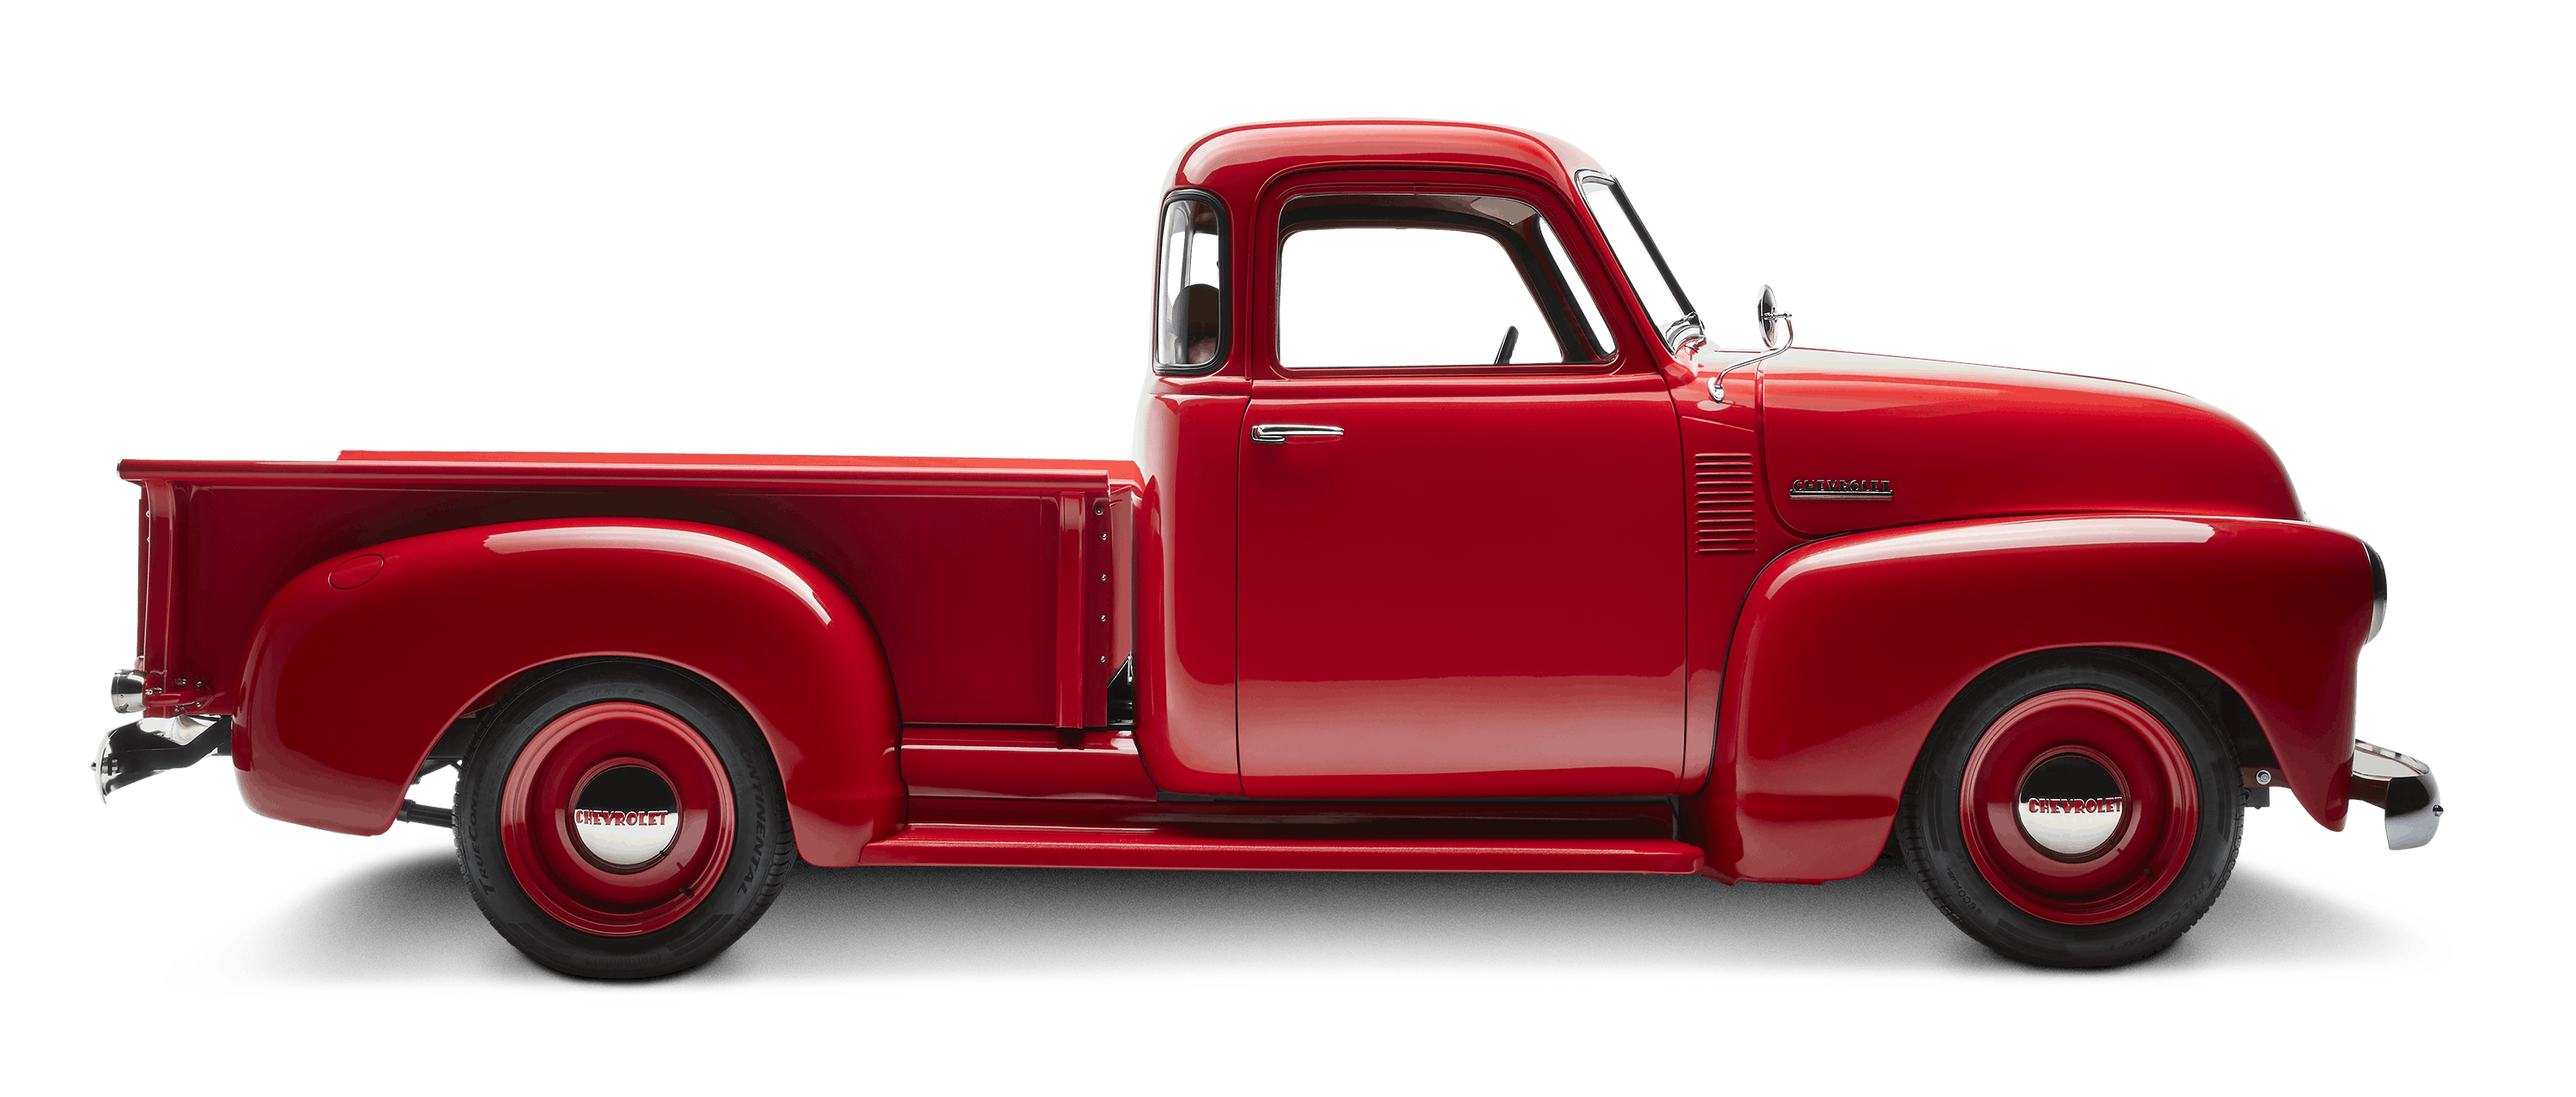 Vintage Chevy Truck: Modern Take on Chevy 3100 Truck | Kindred ...